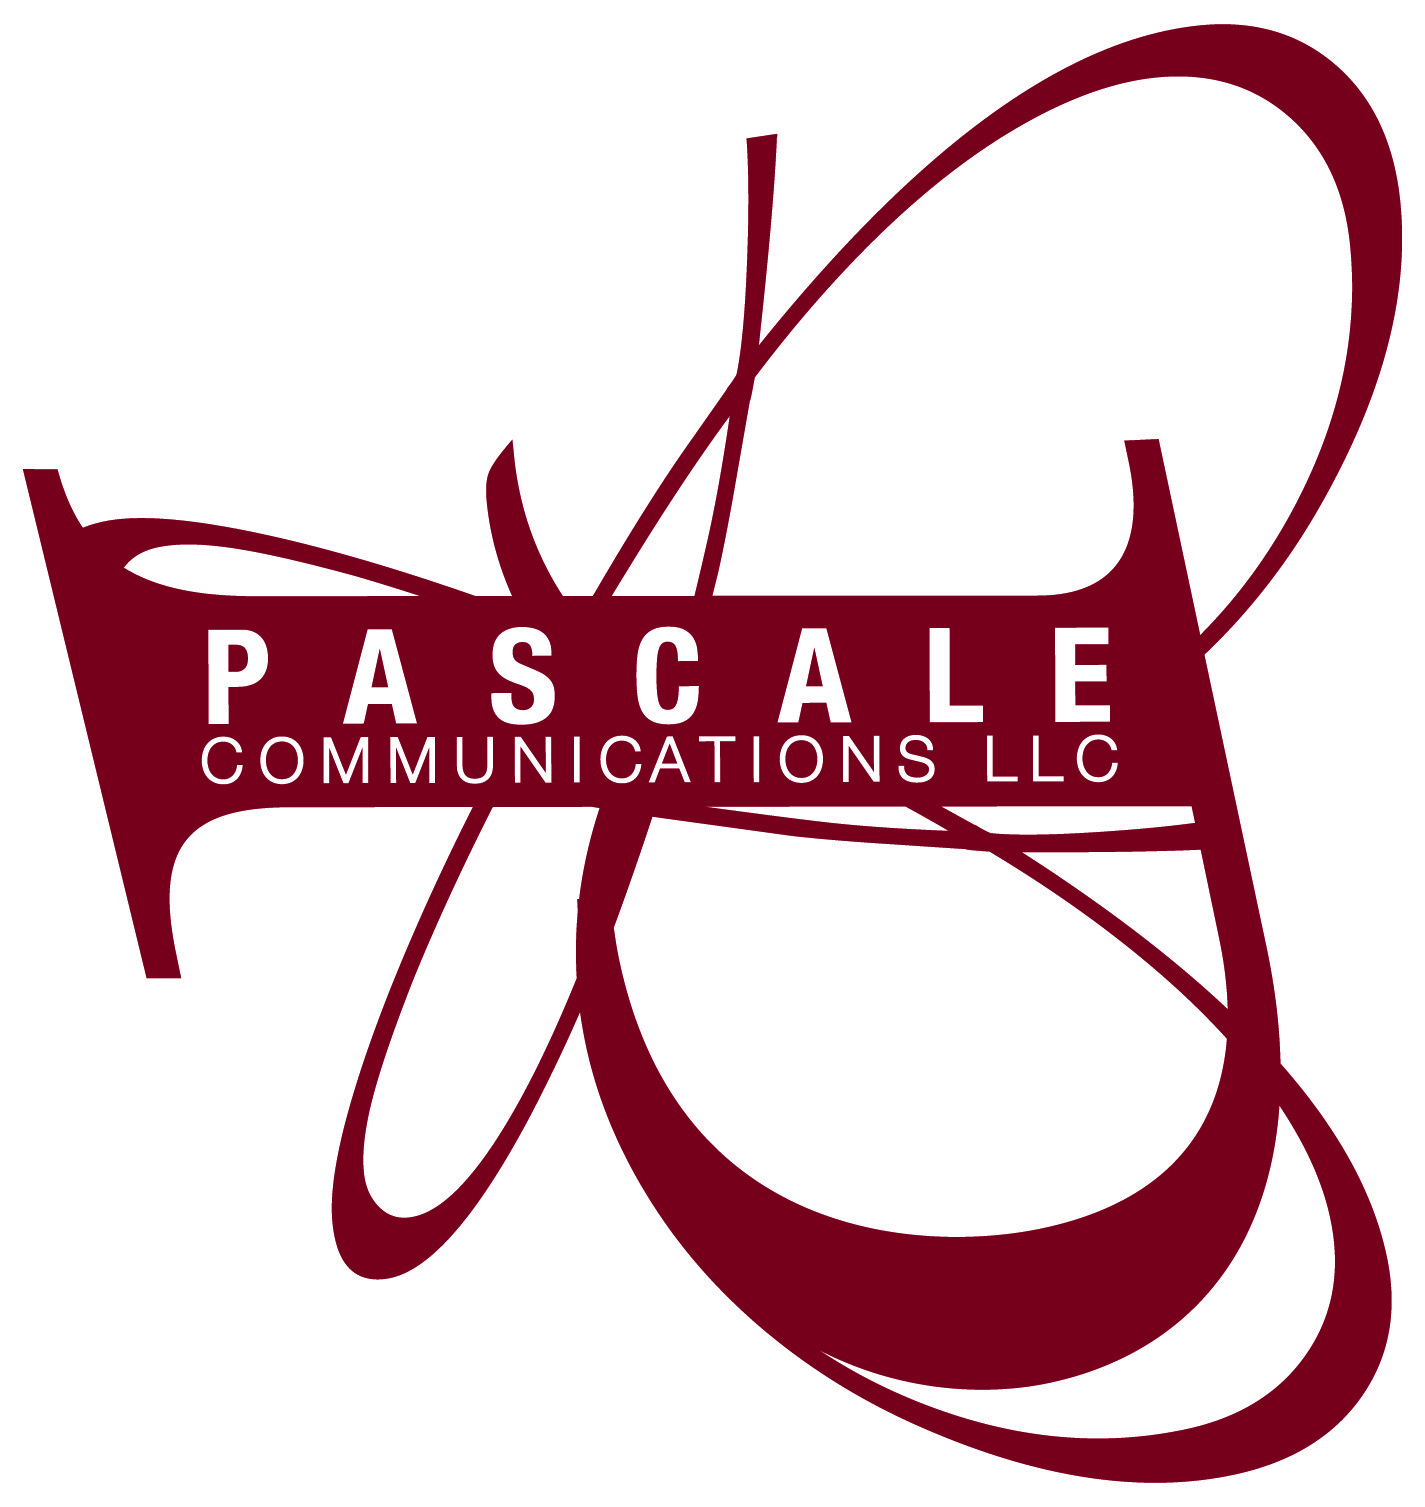 Georgette Pascale - Logo - https://s41078.pcdn.co/wp-content/uploads/2018/03/PASACLE-COMMUNICATIONS-LOGO.jpg